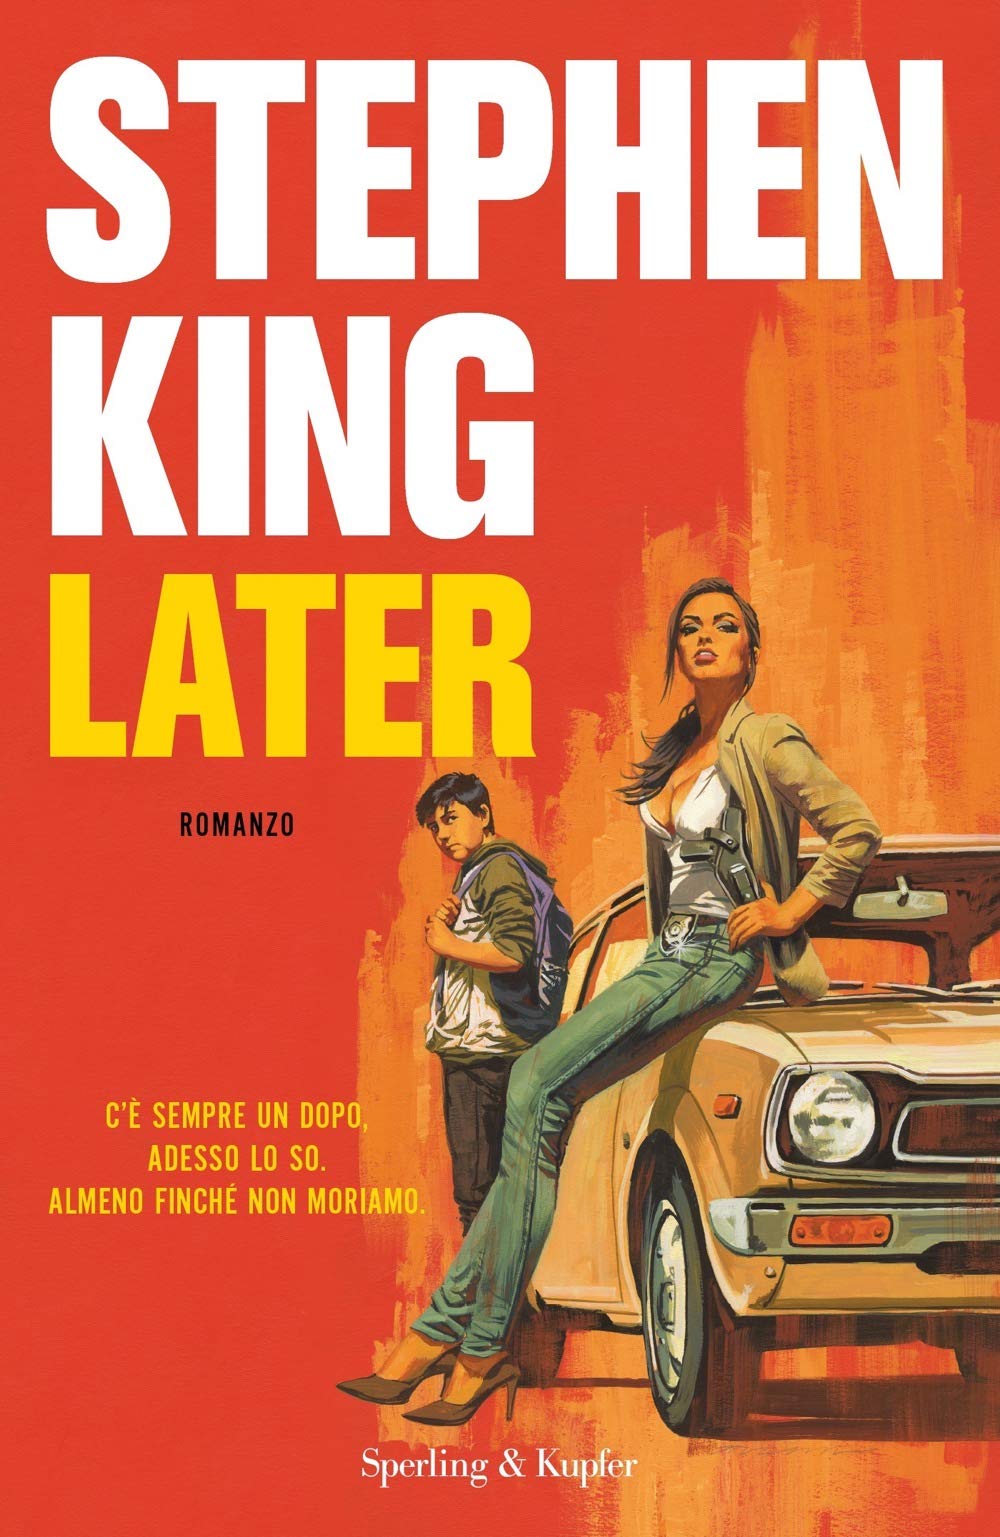 later libro king 2021 cover